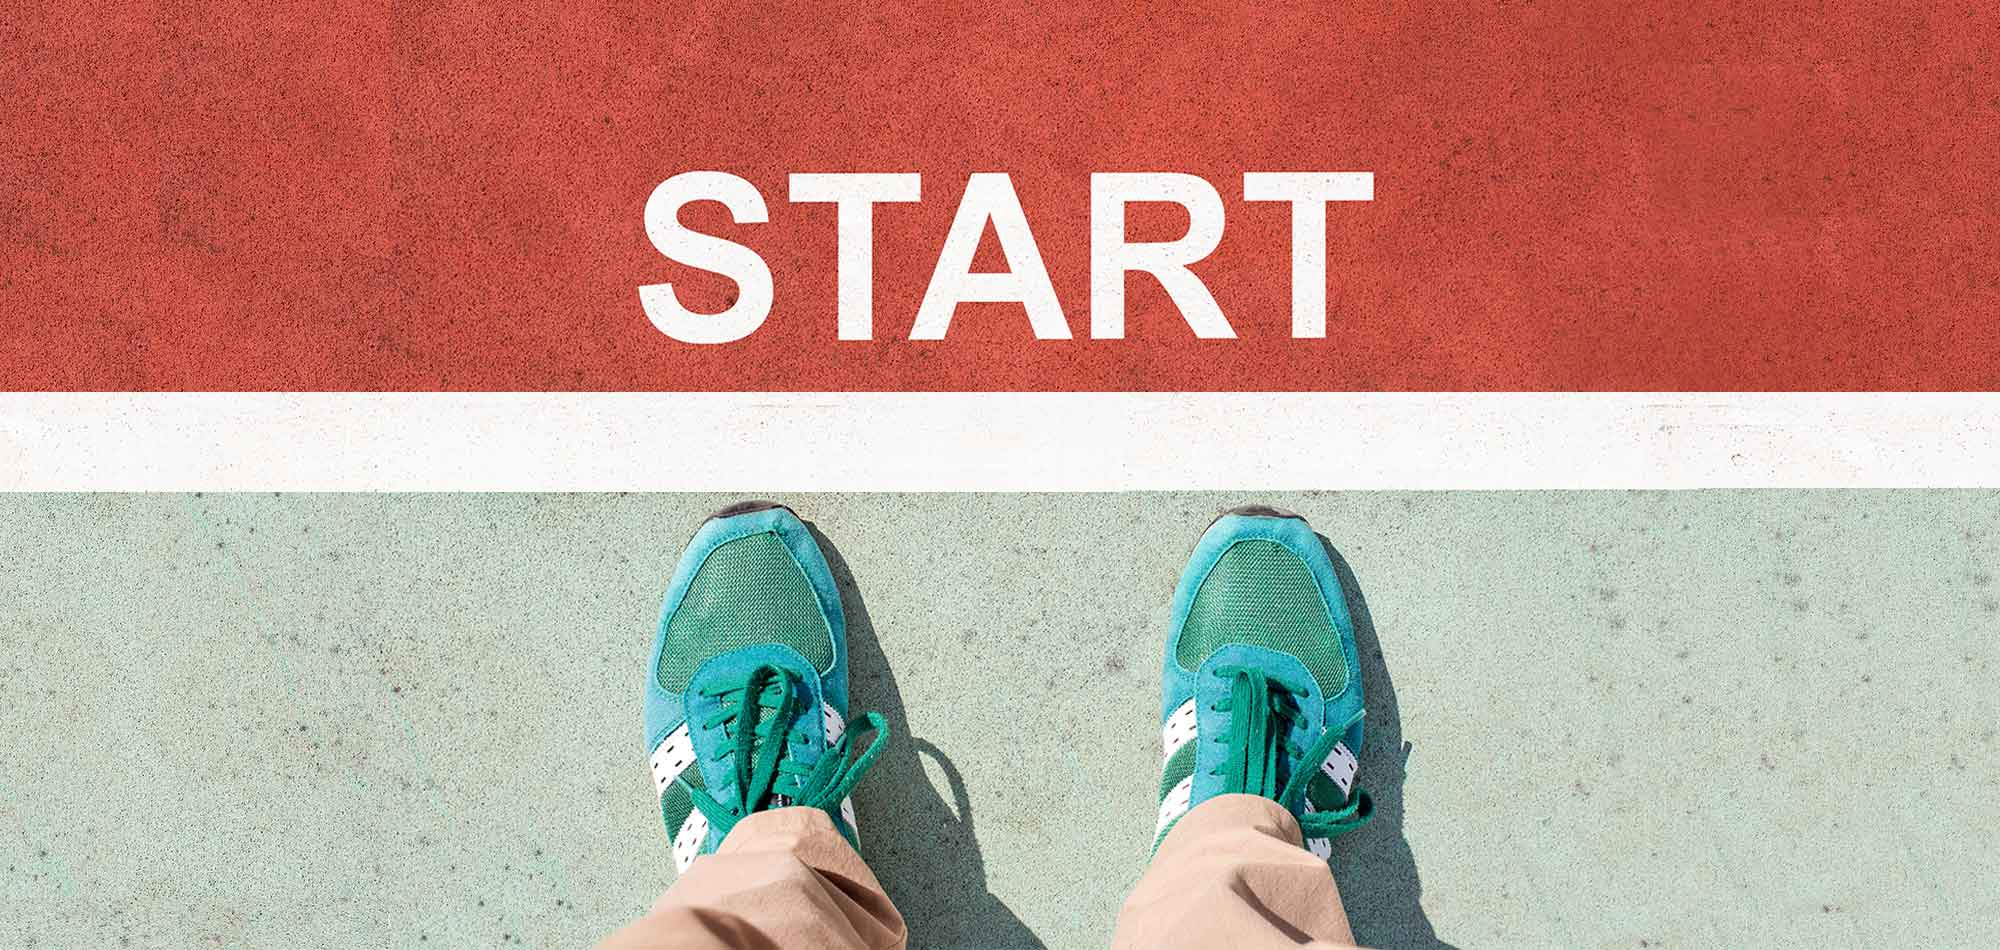 Blue running shoes standing on the starting line of a foot race